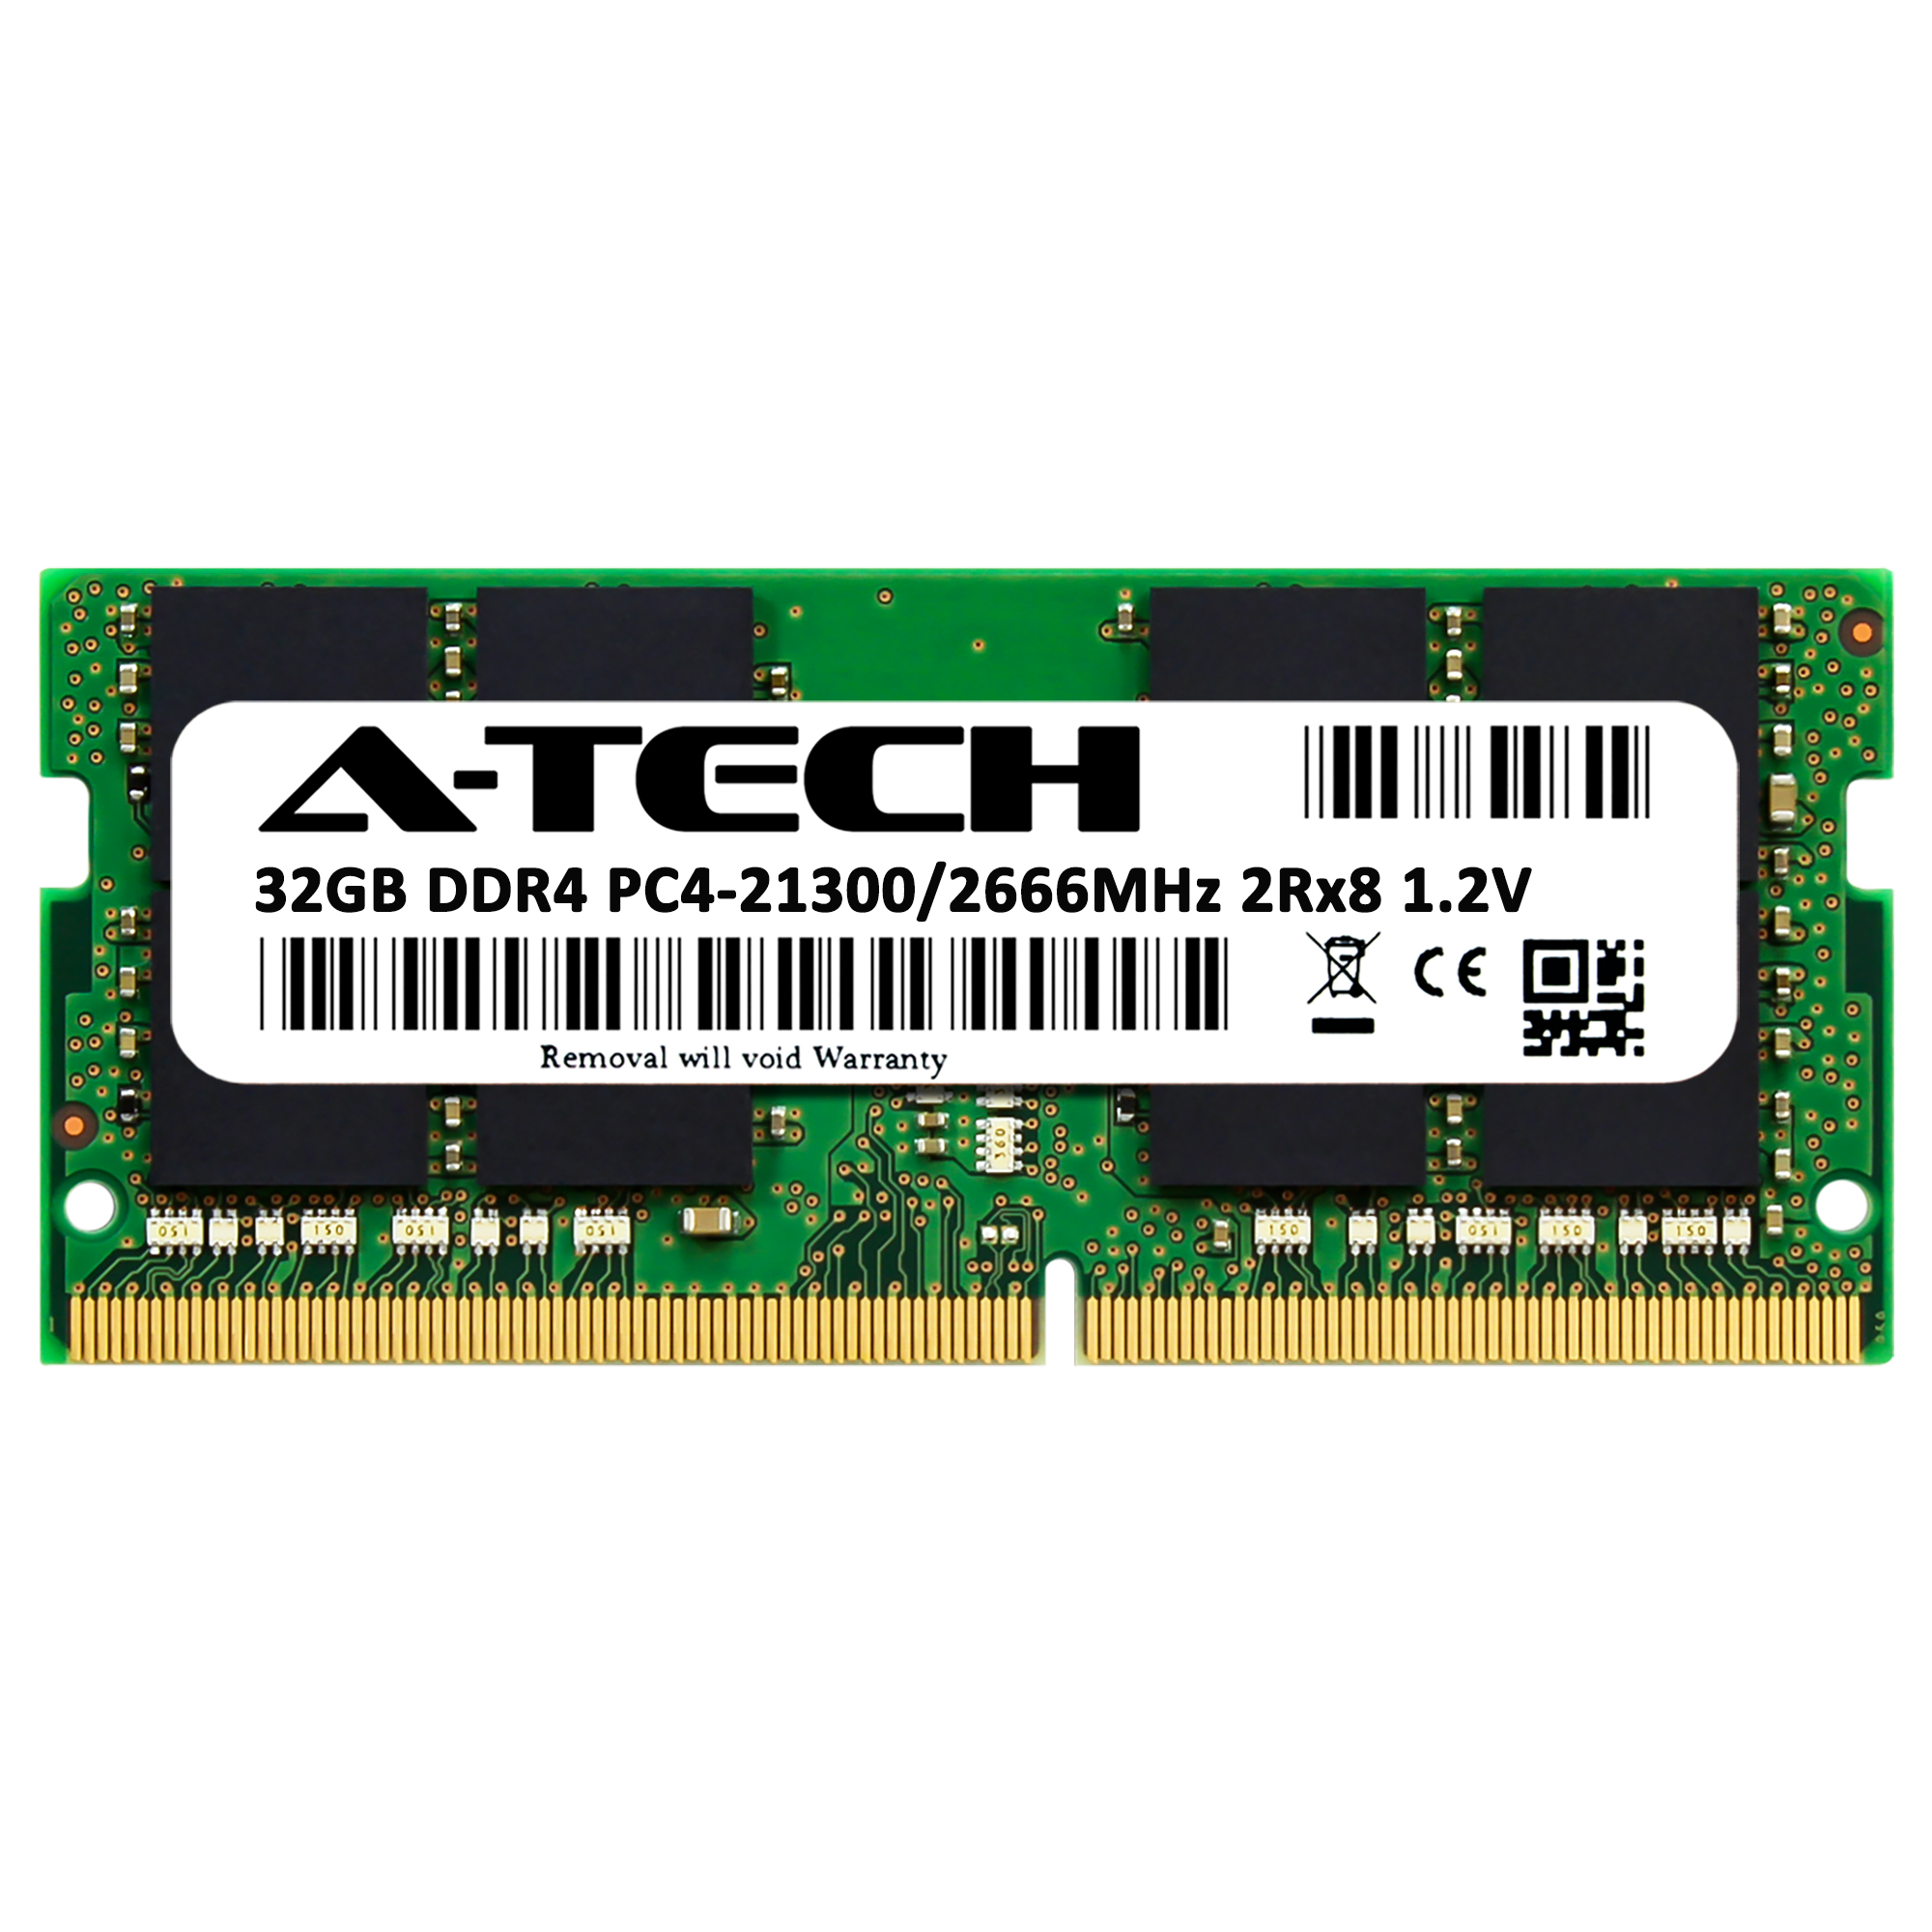 parts-quick 16GB Memory for Alienware M15 Gaming Laptop 2Rx8 DDR4 2666MHz SODIMM RAM